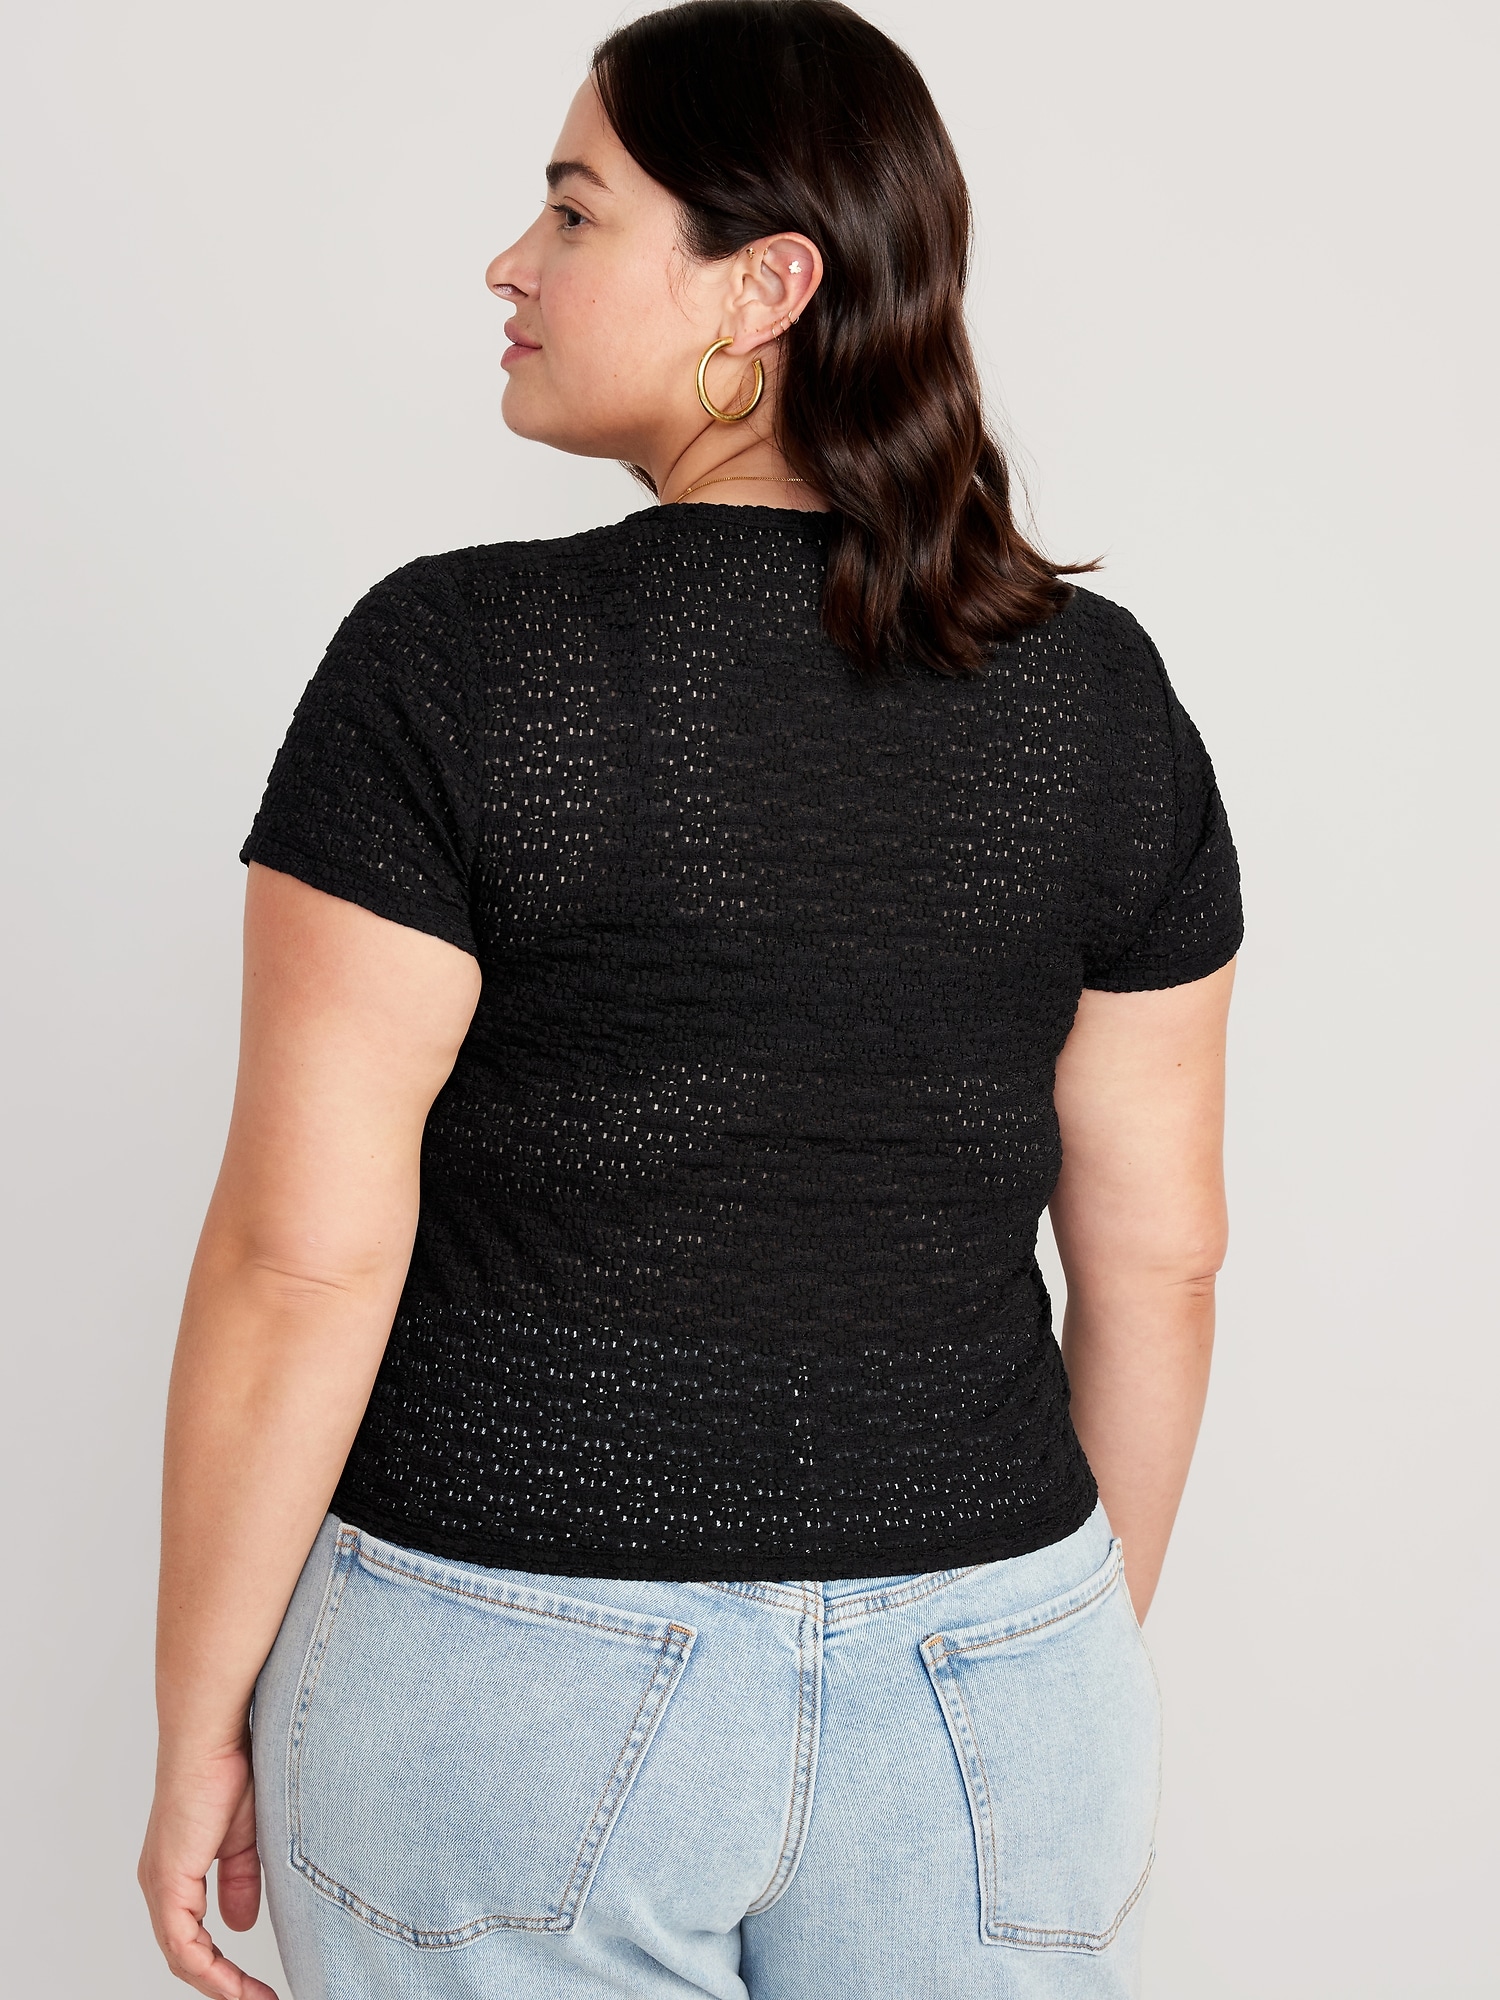 Fitted Short-Sleeve Lace Top for Women | Old Navy